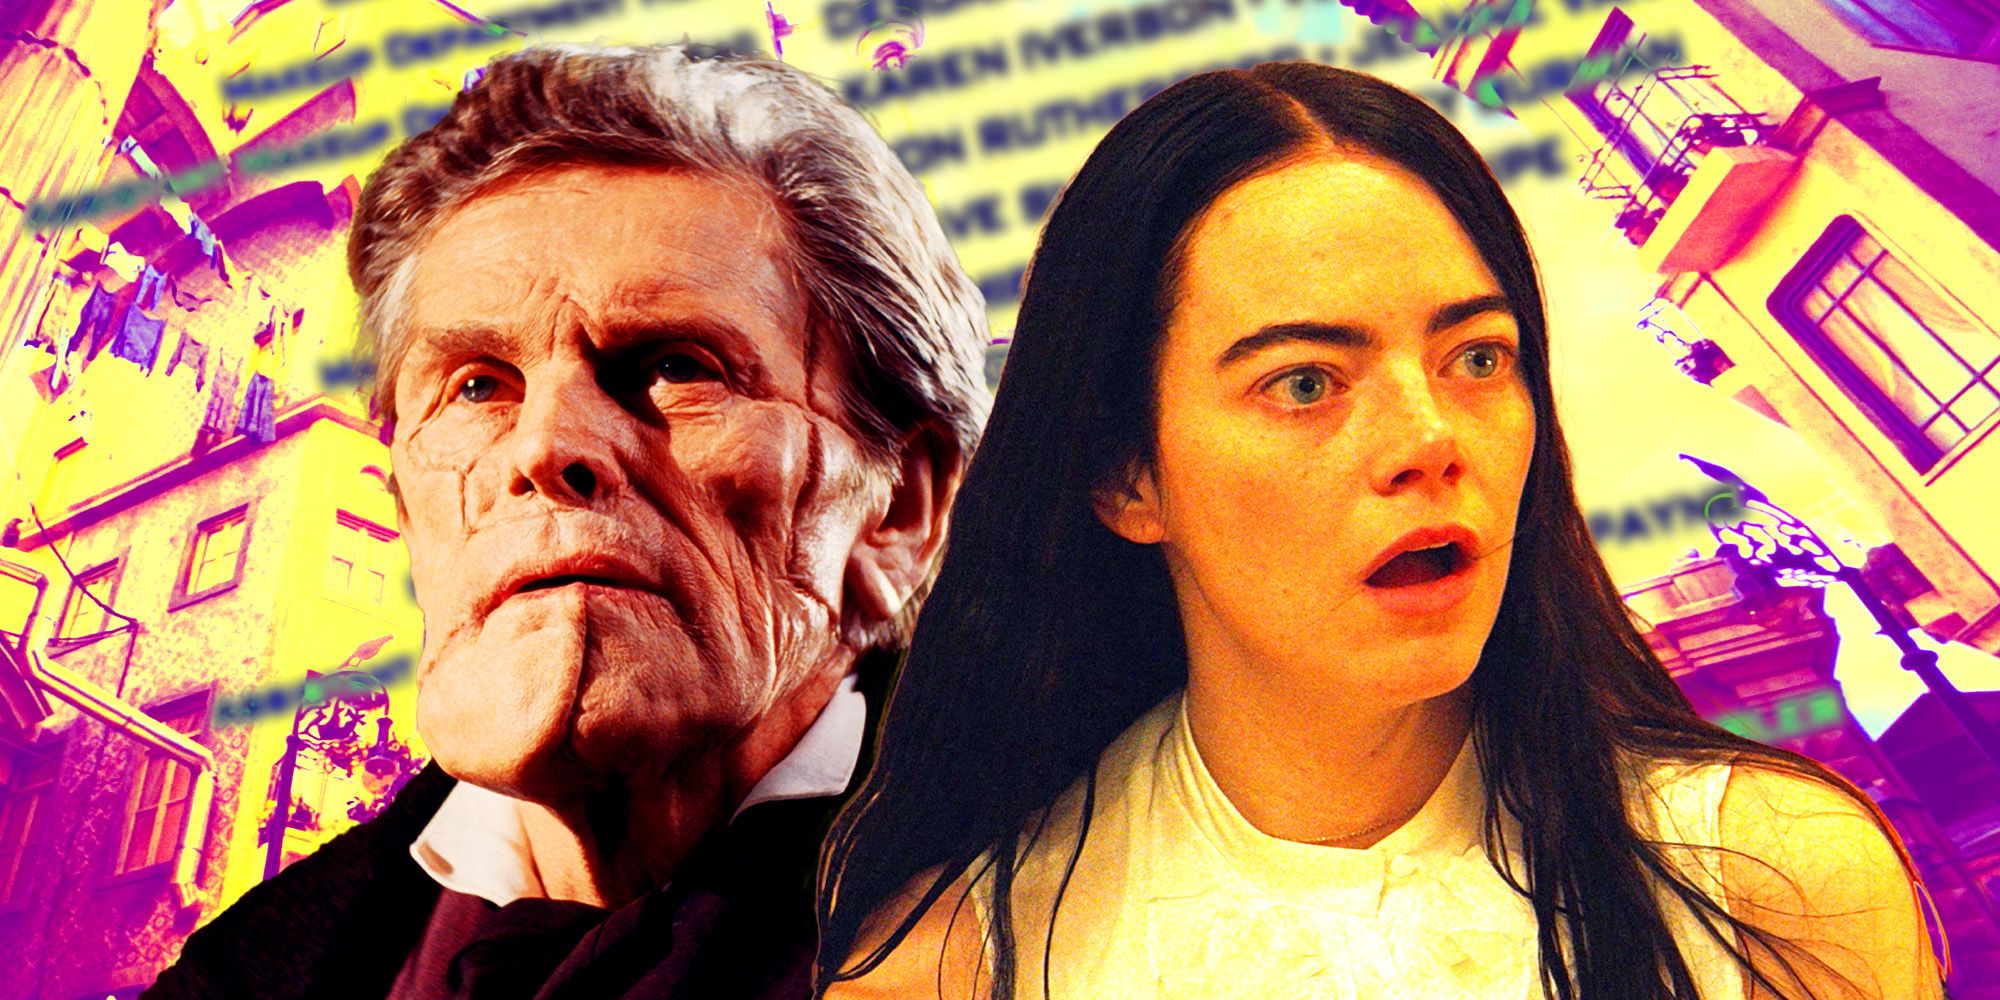 10 Movies Like Poor Things To Watch After Emma Stone’s Dark Comedy